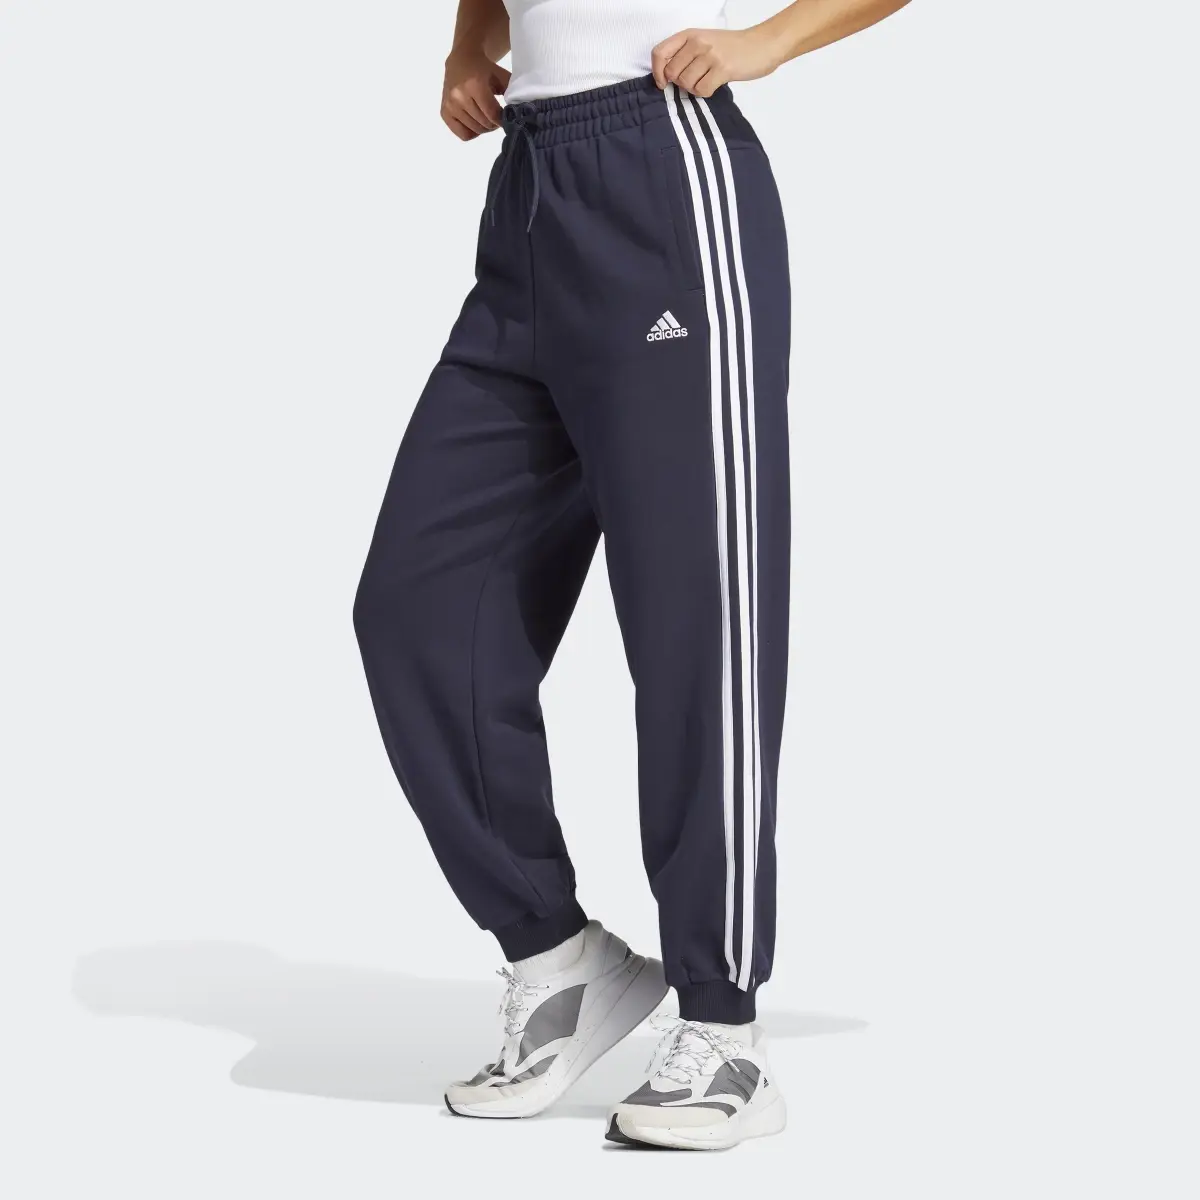 Adidas Essentials 3-Stripes French Terry Loose-Fit Pants. 1